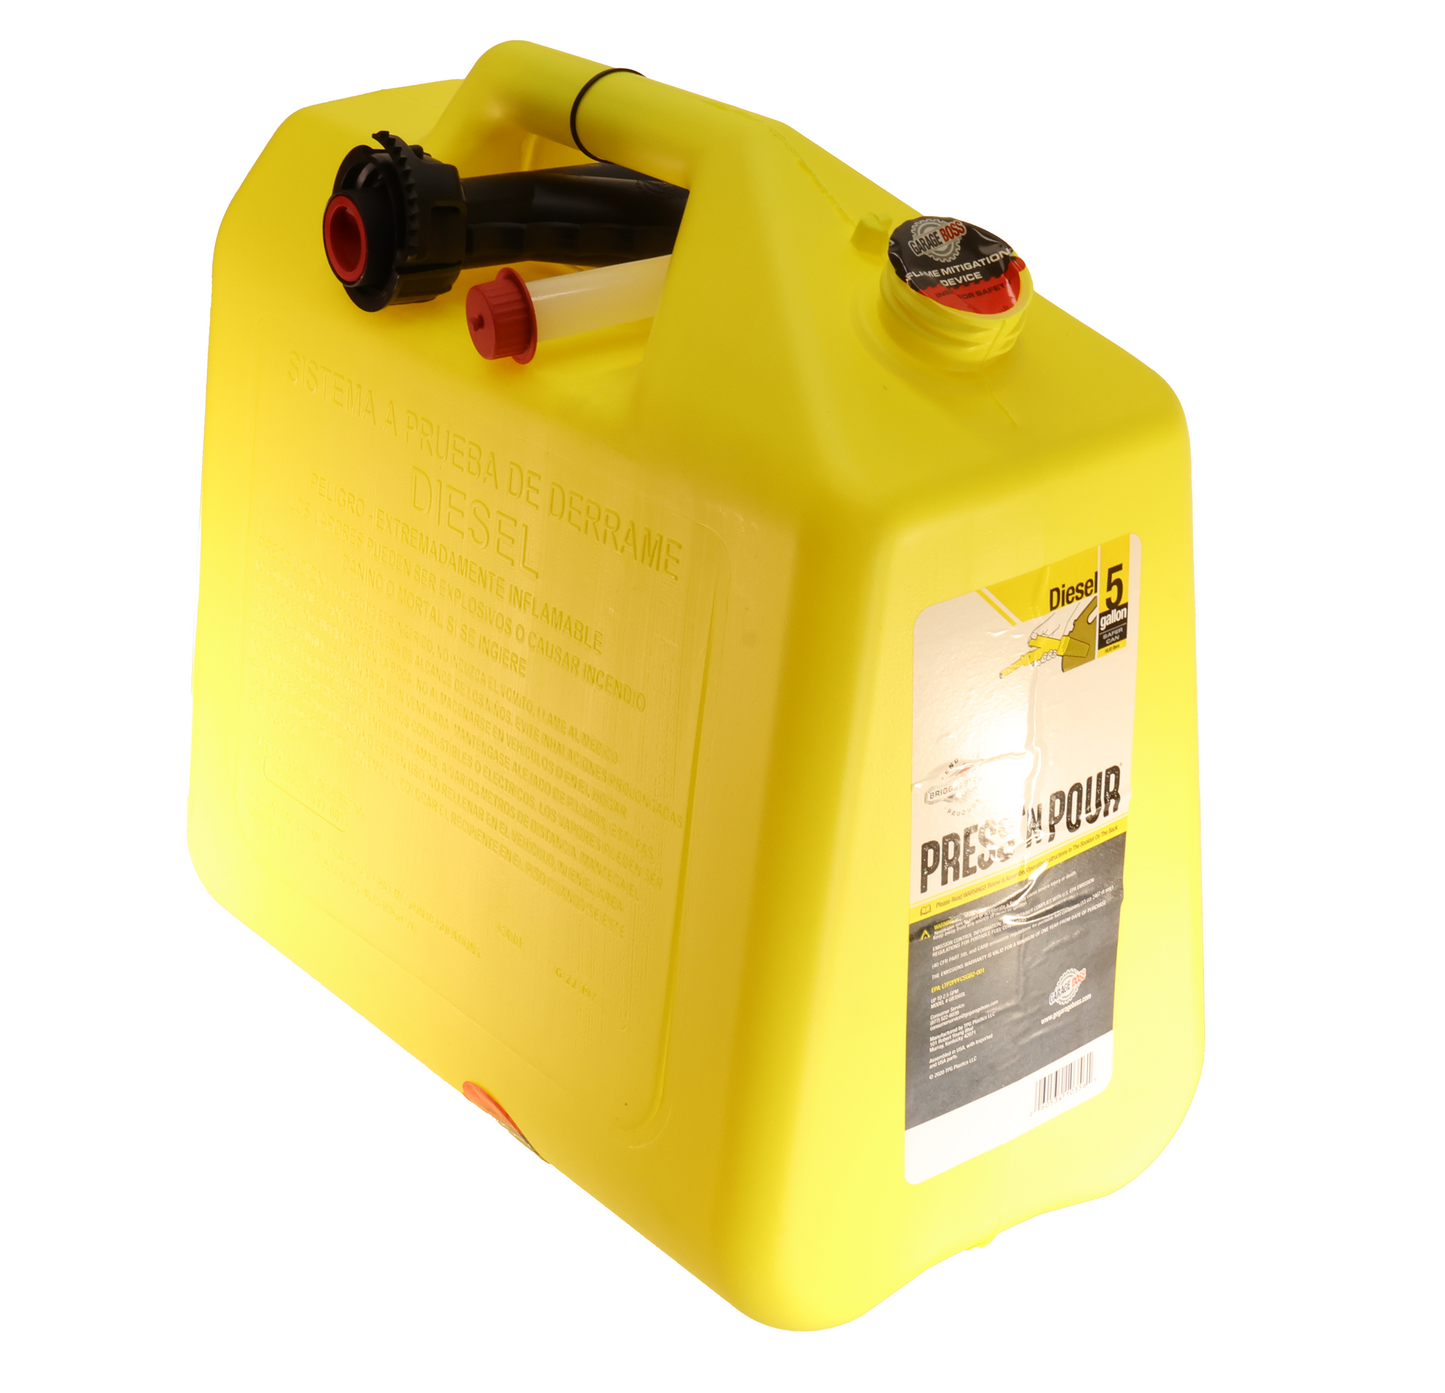 Sunbelt Products 5 Gallon Press N Pour Diesel Can - B1GB356